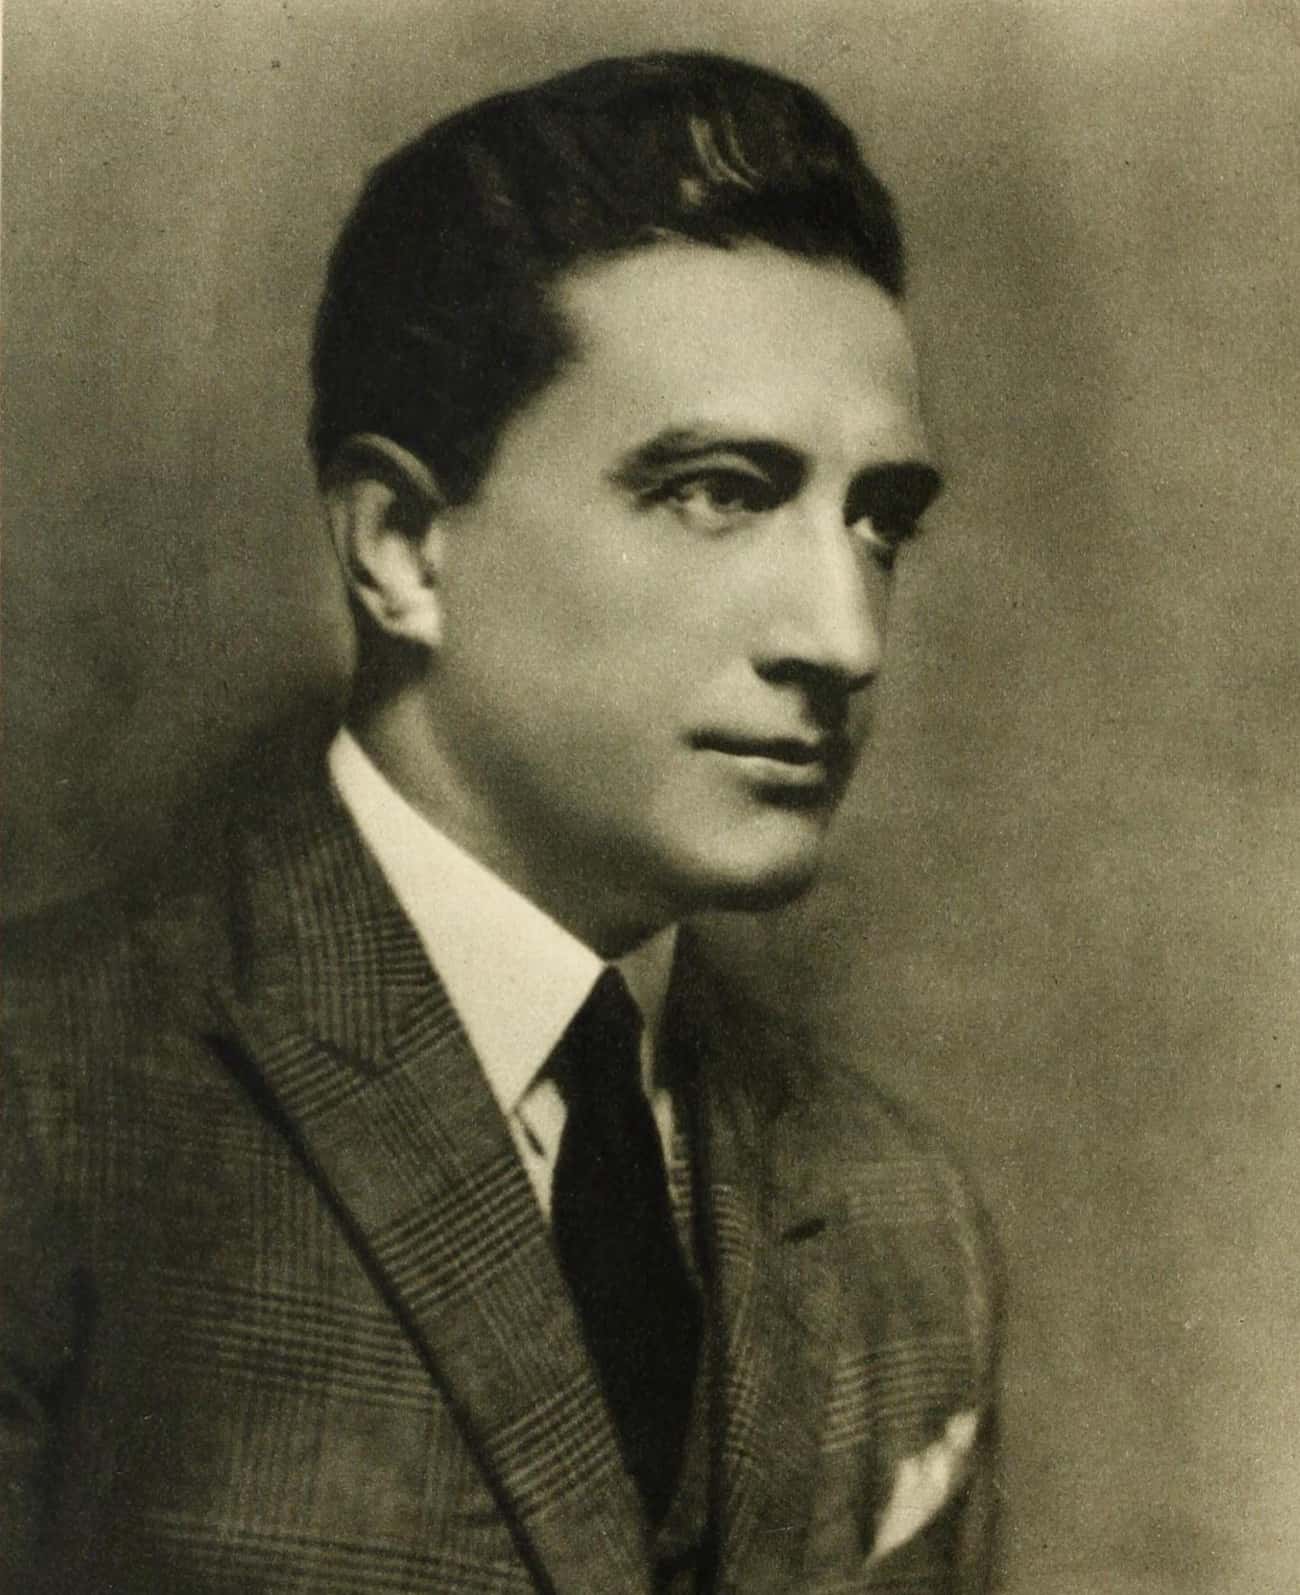 Silent Film Star Francis X. Bushman Was Called "The Handsomest Man In The World"